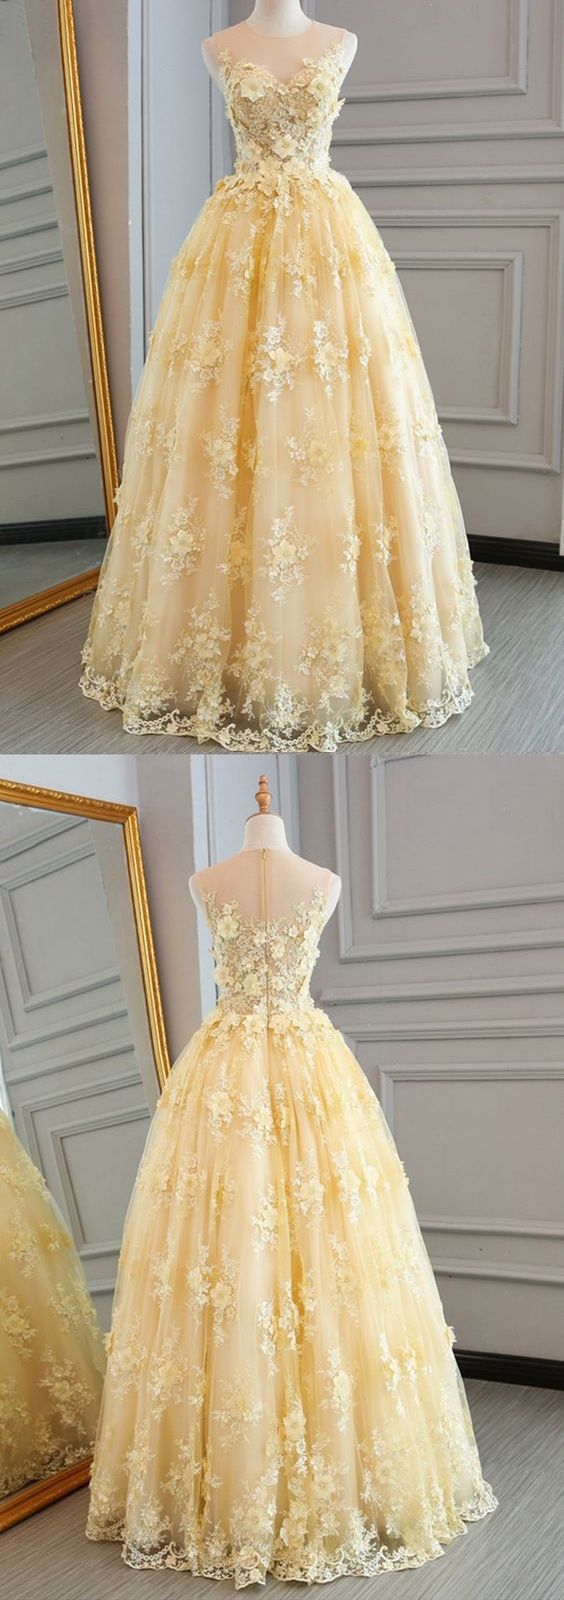 Long Prom Dresses Scoop A-line Floor-length Lace Sexy Yellow Prom Dress ...